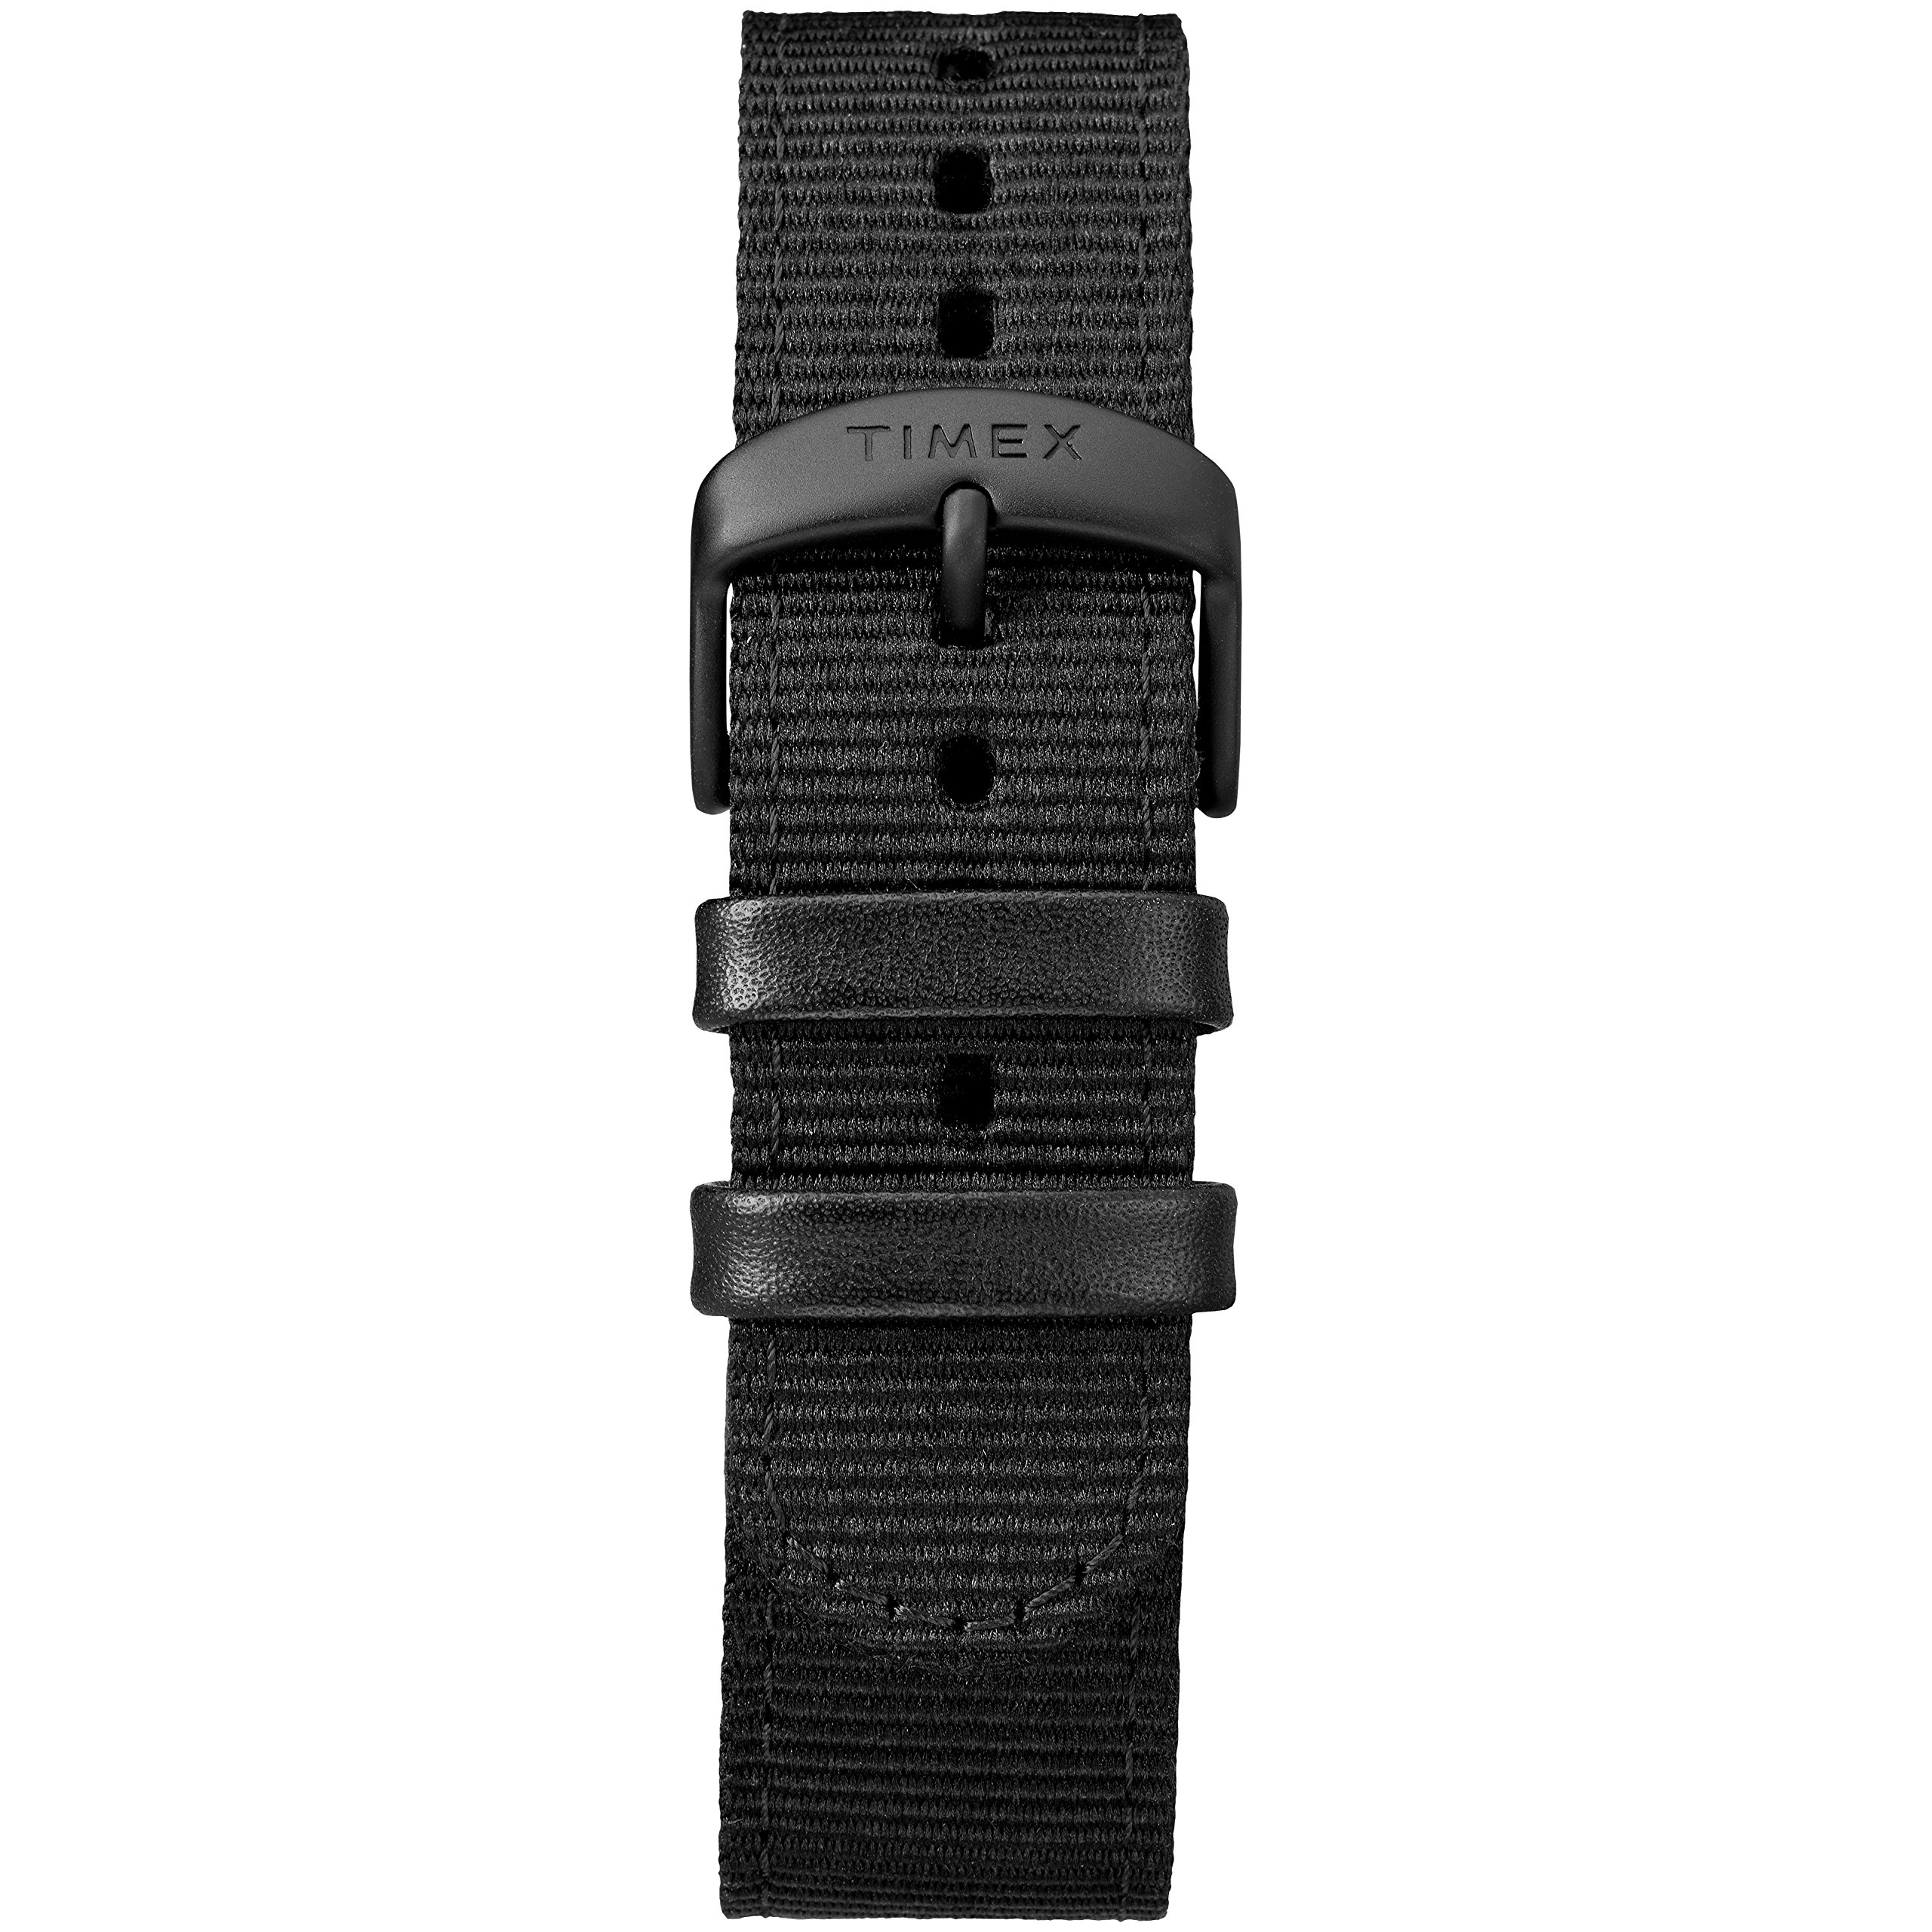 Timex Men's TW4B14200 Expedition Scout 40 Black Leather/Nylon Strap Watch